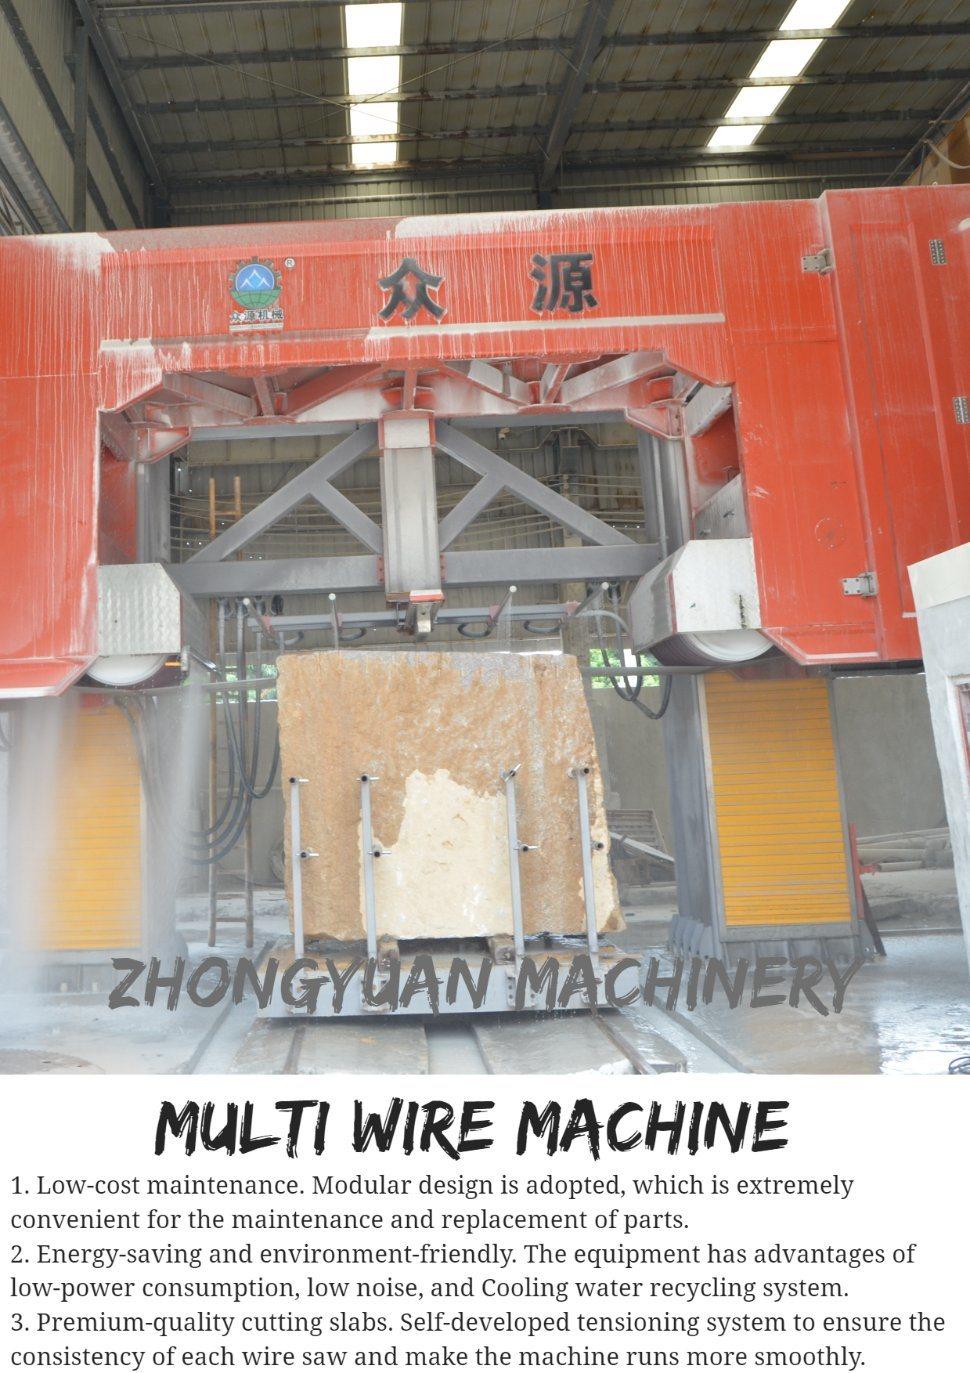 Multiwire Saw Machine for Cutting 5.3 6.3mm Slabs